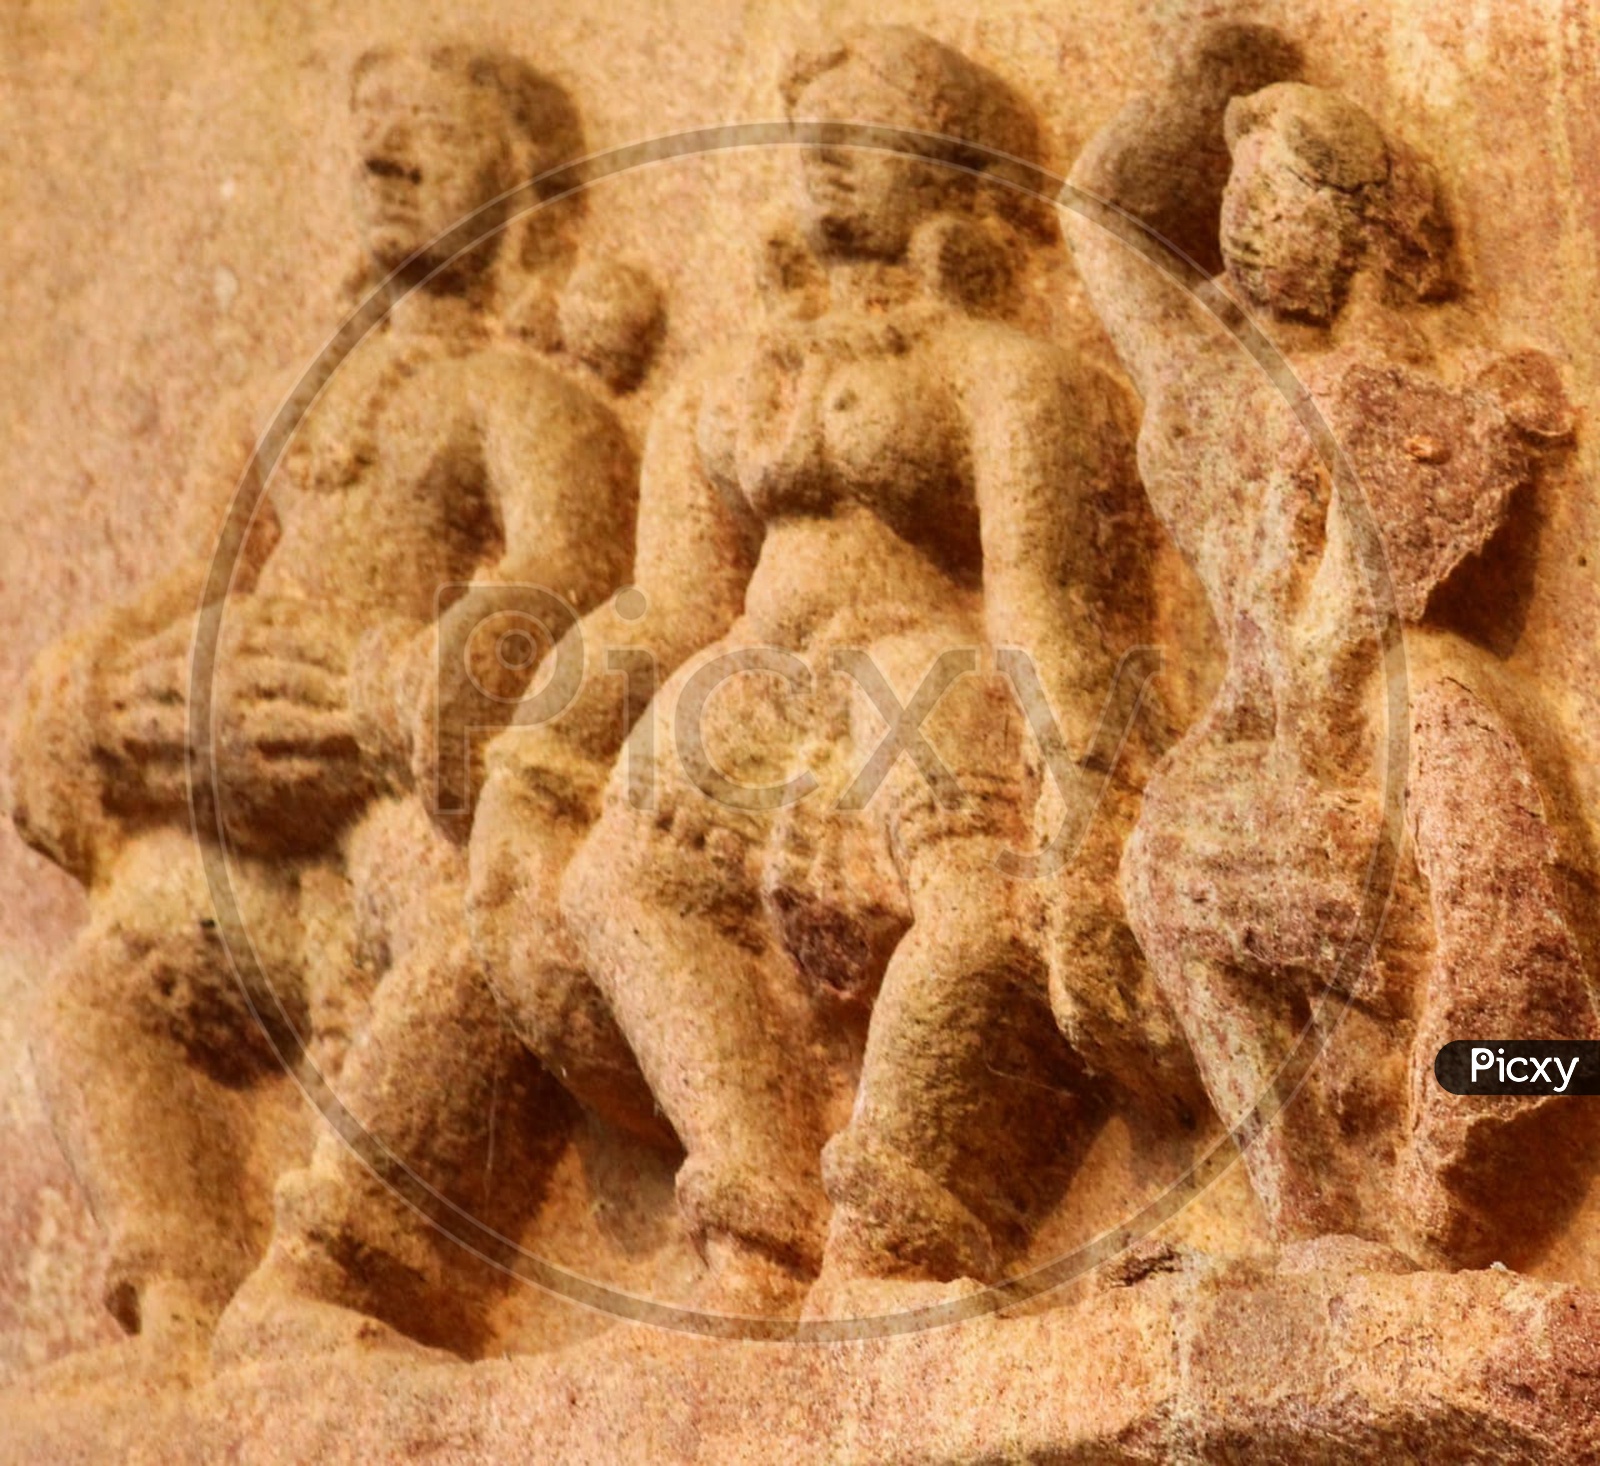 Stone Sculptures On Walls Of Ancient  Hindu Temple  Built During  Kakathiya Dynasty In  Warangal